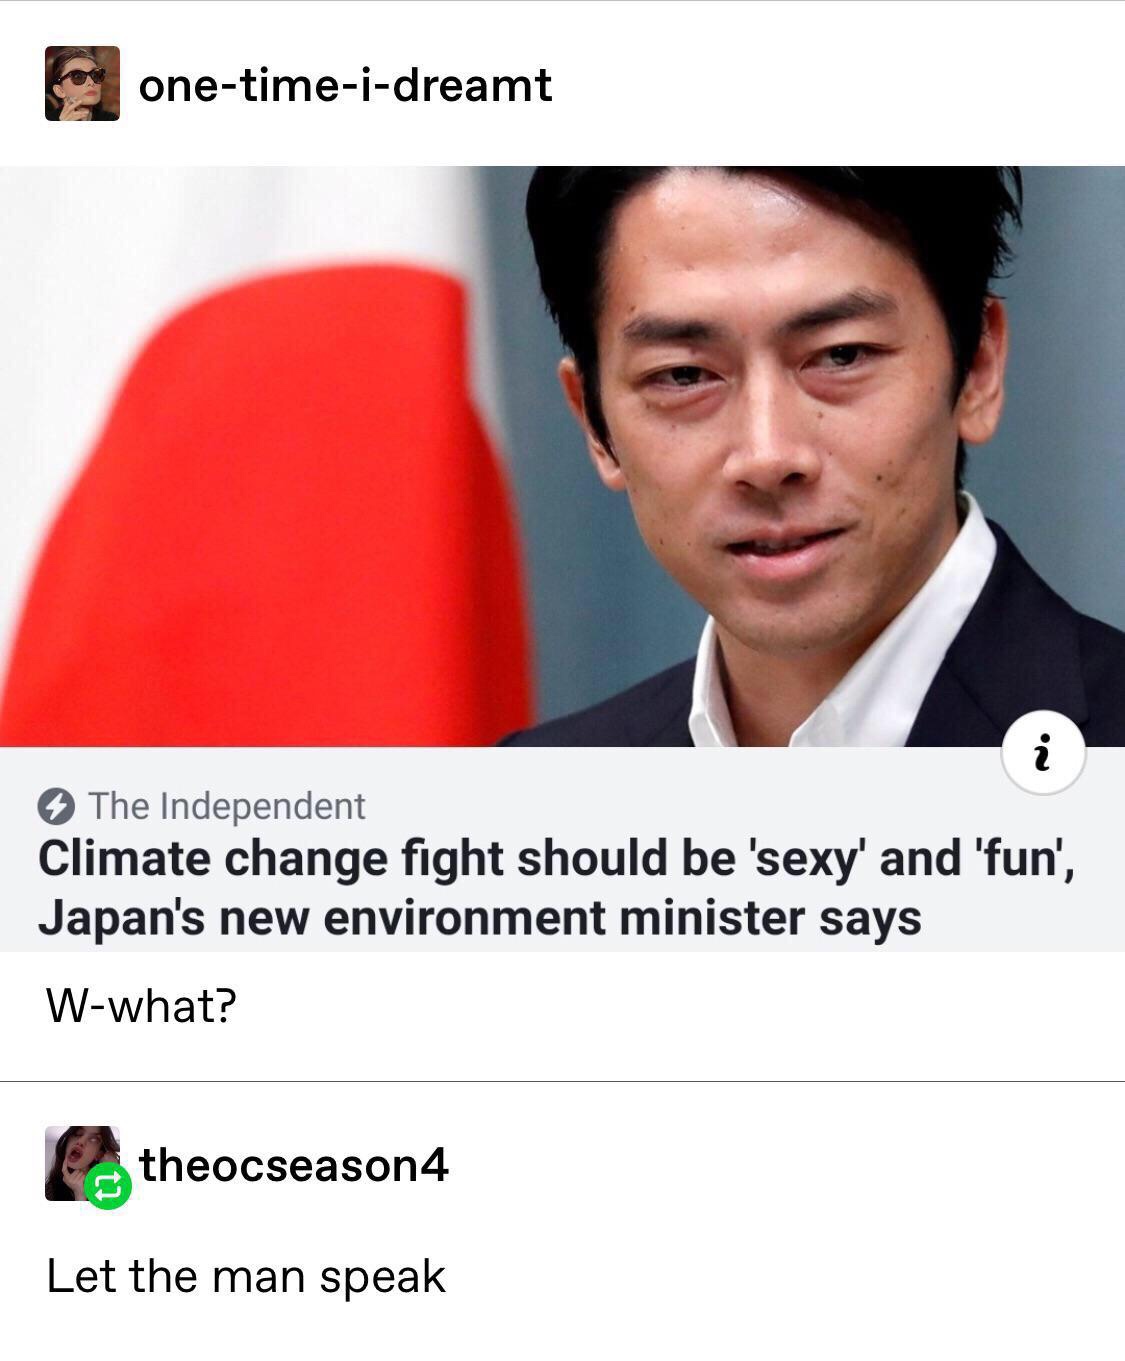 climate change fight should be sexy and fun - onetimeidreamt The Independent Climate change fight should be 'sexy' and 'fun', Japan's new environment minister says Wwhat? theocseason4 Let the man speak